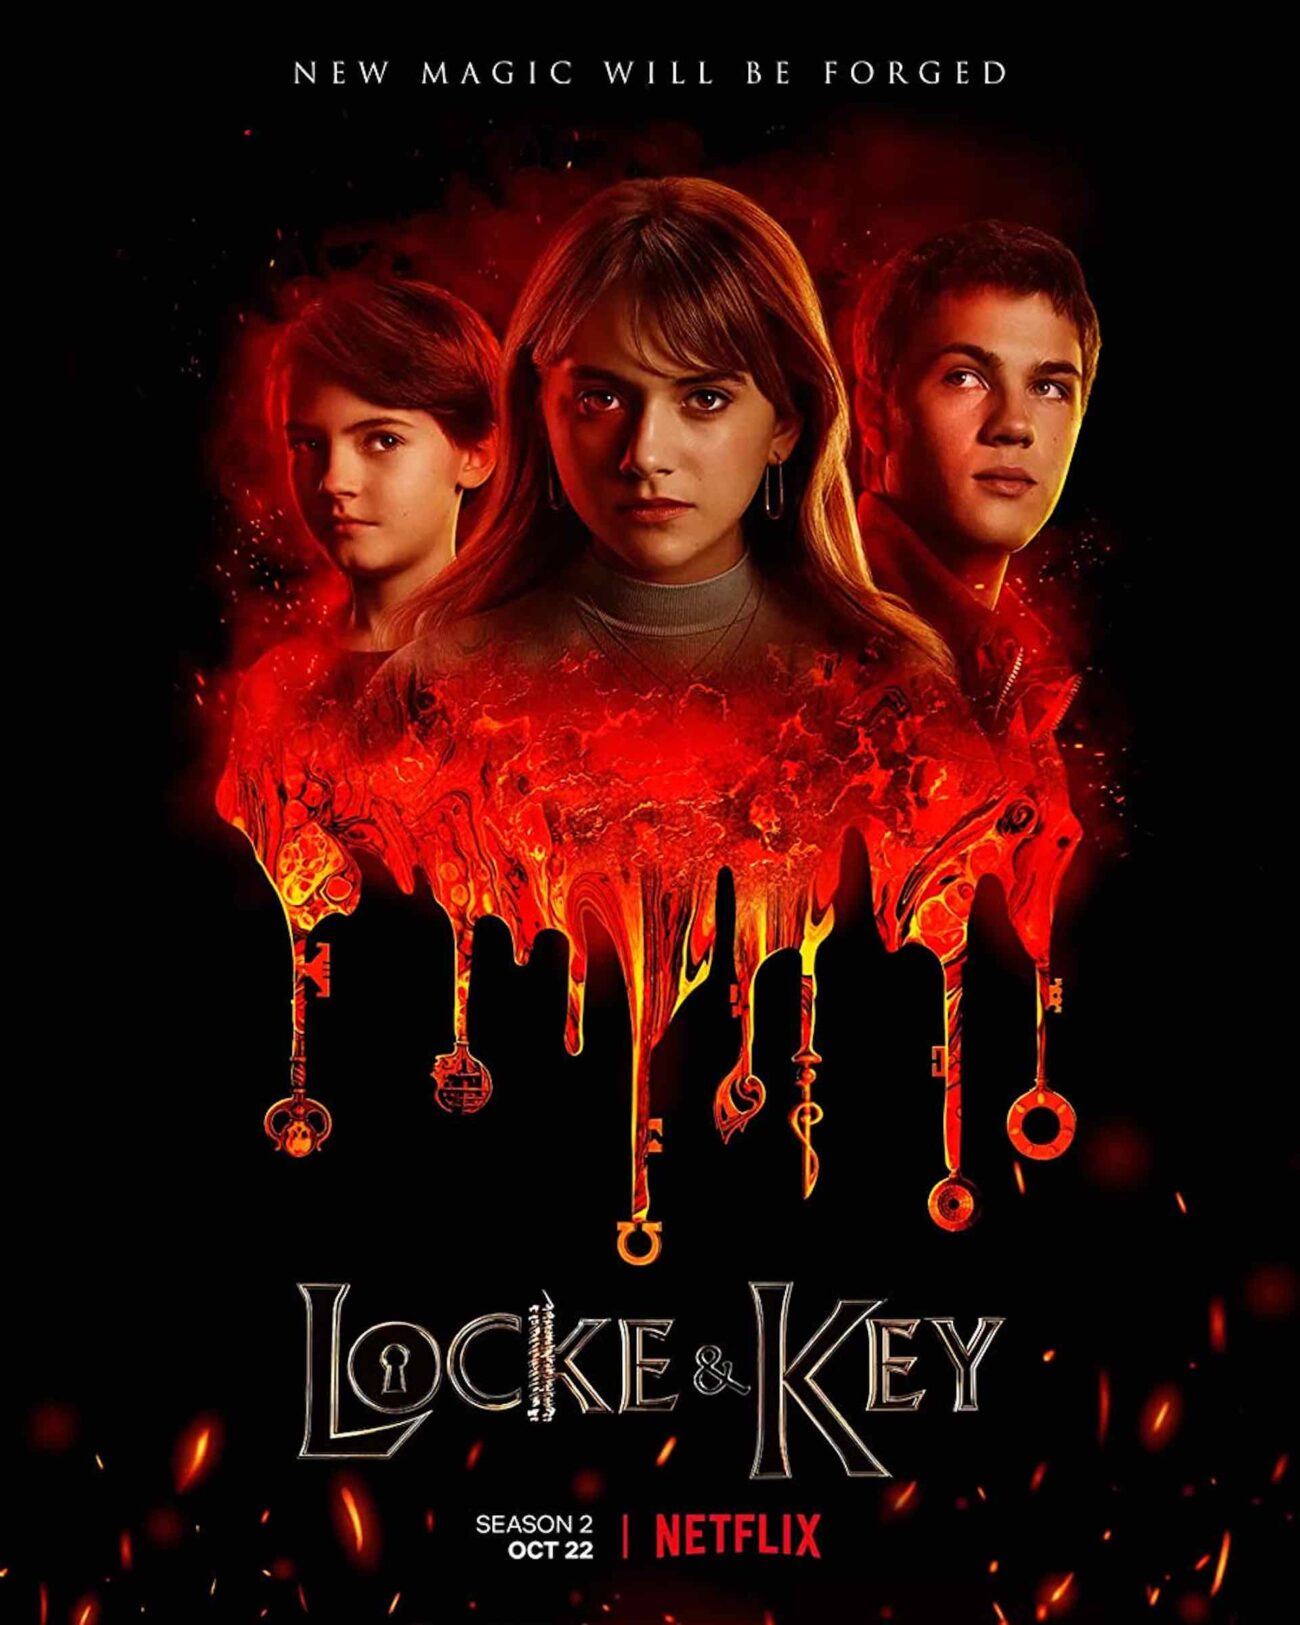 'Locke and Key' season 2 has arrived and the keys seem to have snapped in the lock. Get ready to face Dodge once again as we dive into the new season. 